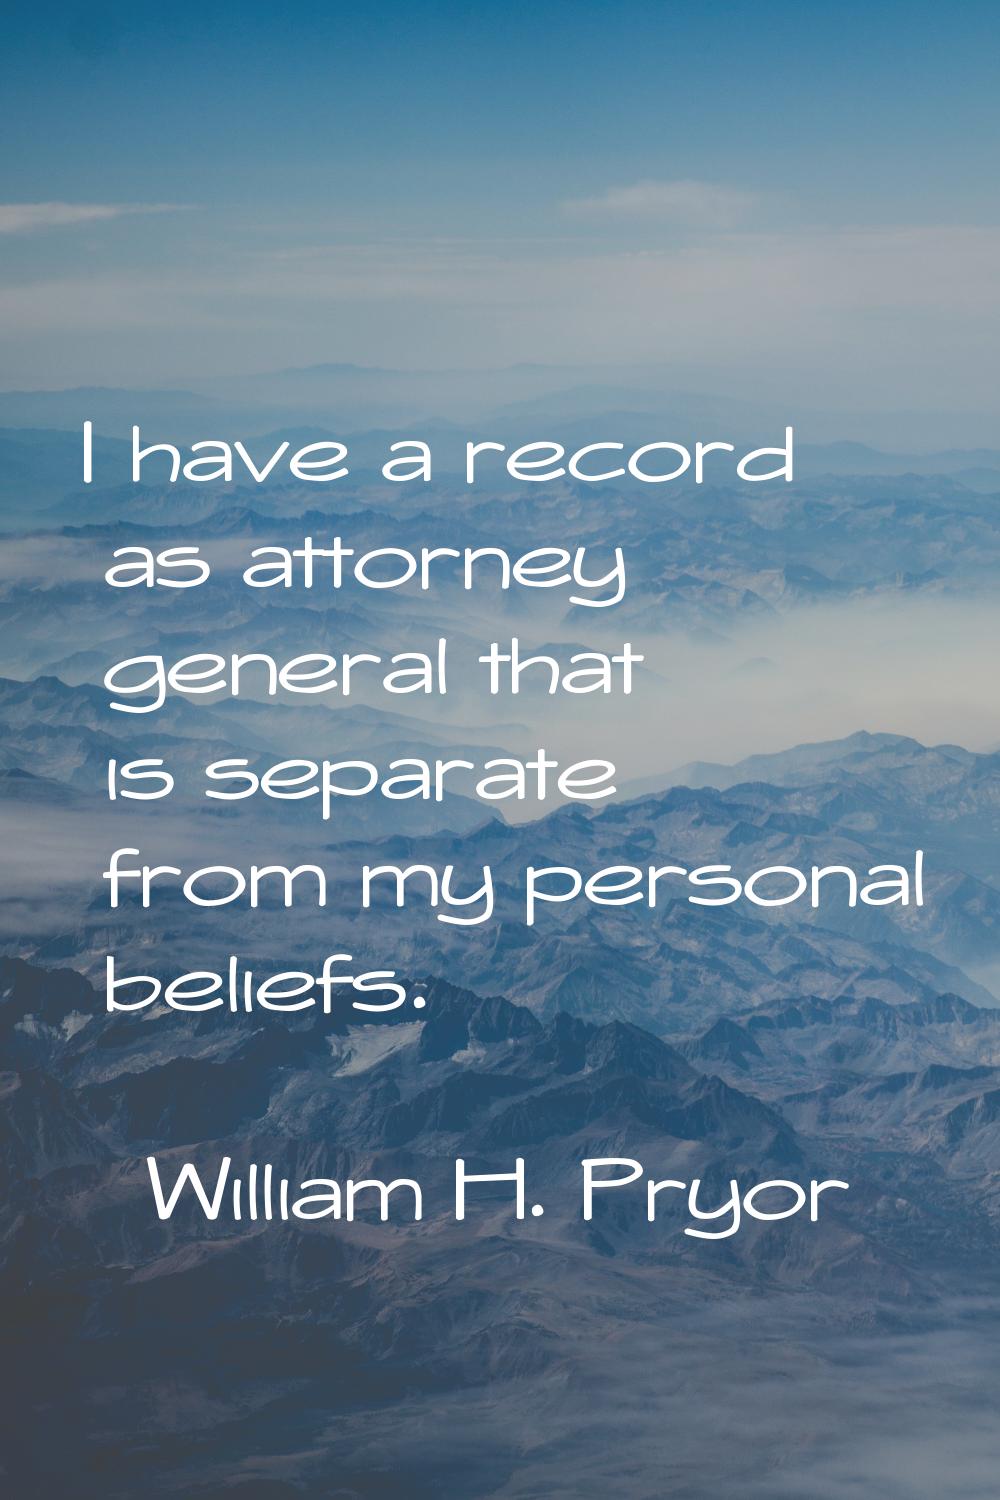 I have a record as attorney general that is separate from my personal beliefs.